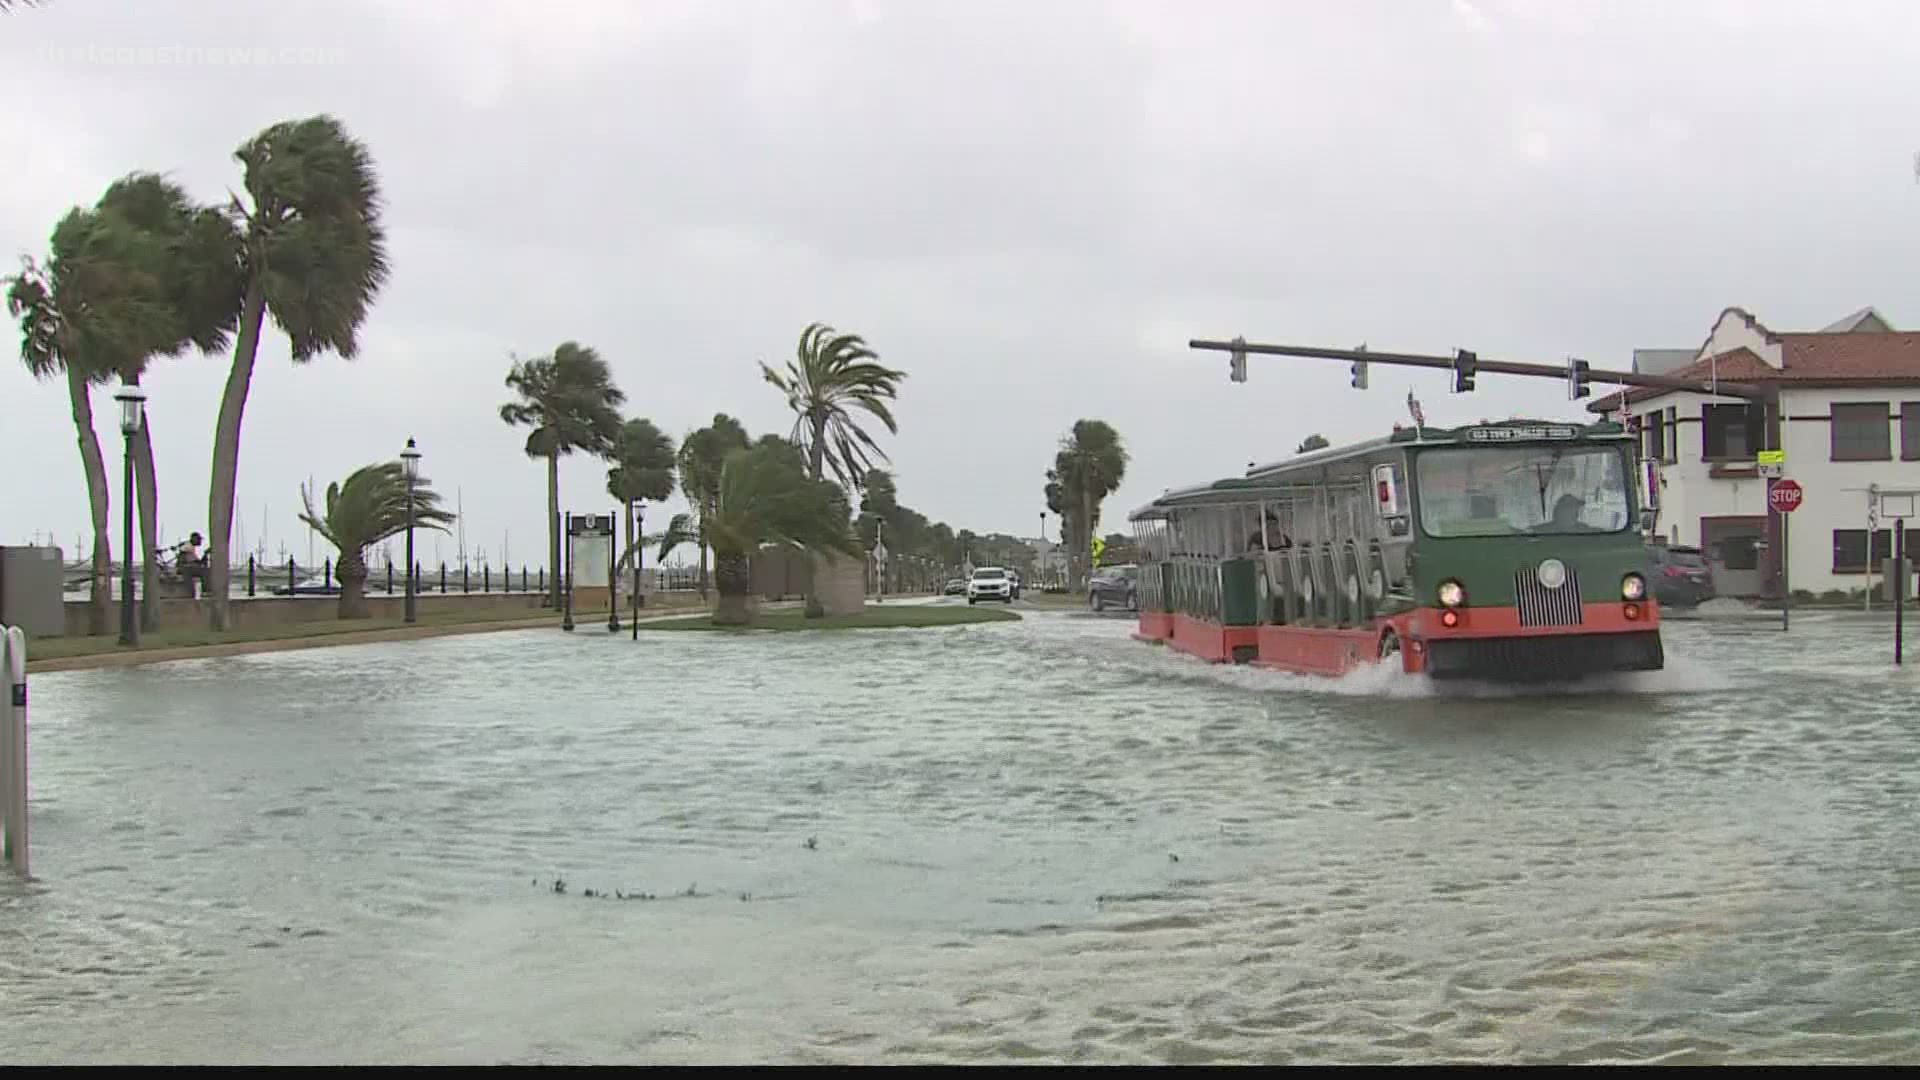 Locals at St. Augustine were surprised that a Nor'easter brought flooding as compared to a hurricane.